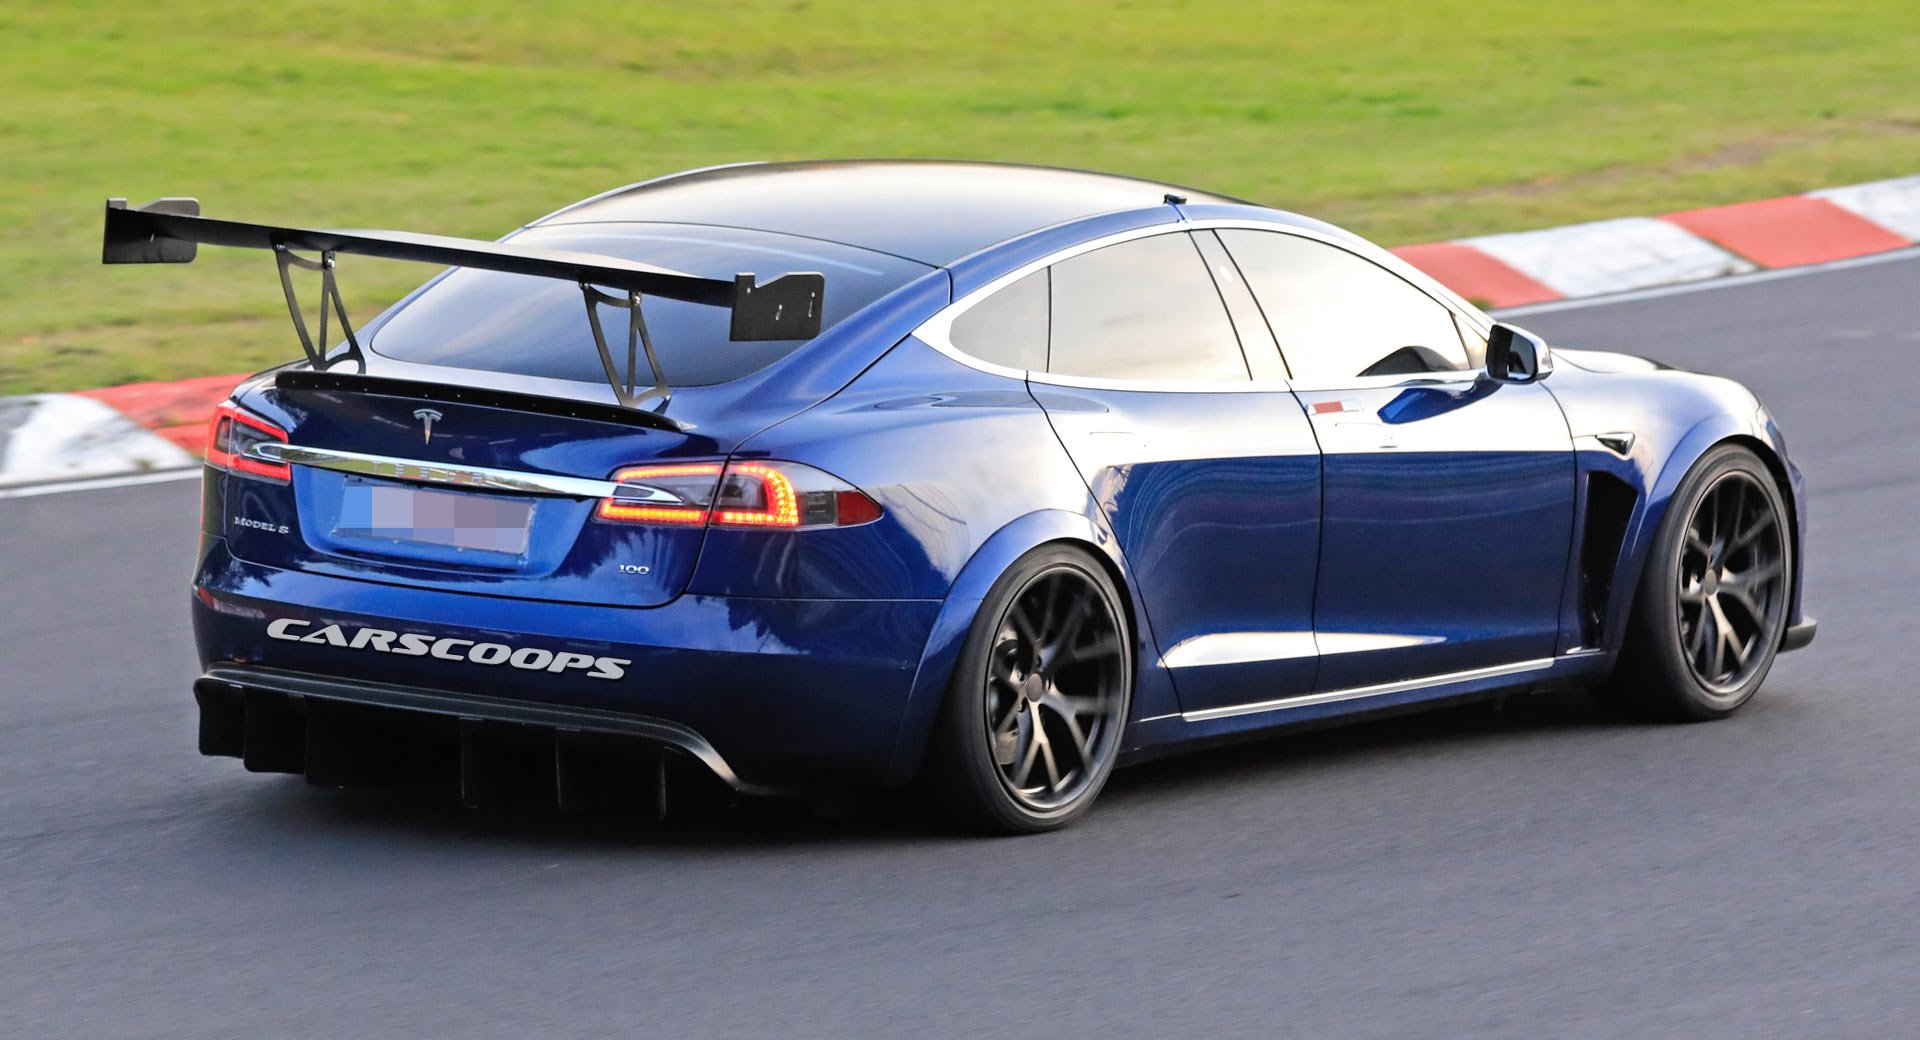 Tesla’s Model S Plaid Prototype Has Sprouted A Massive Rear Wing